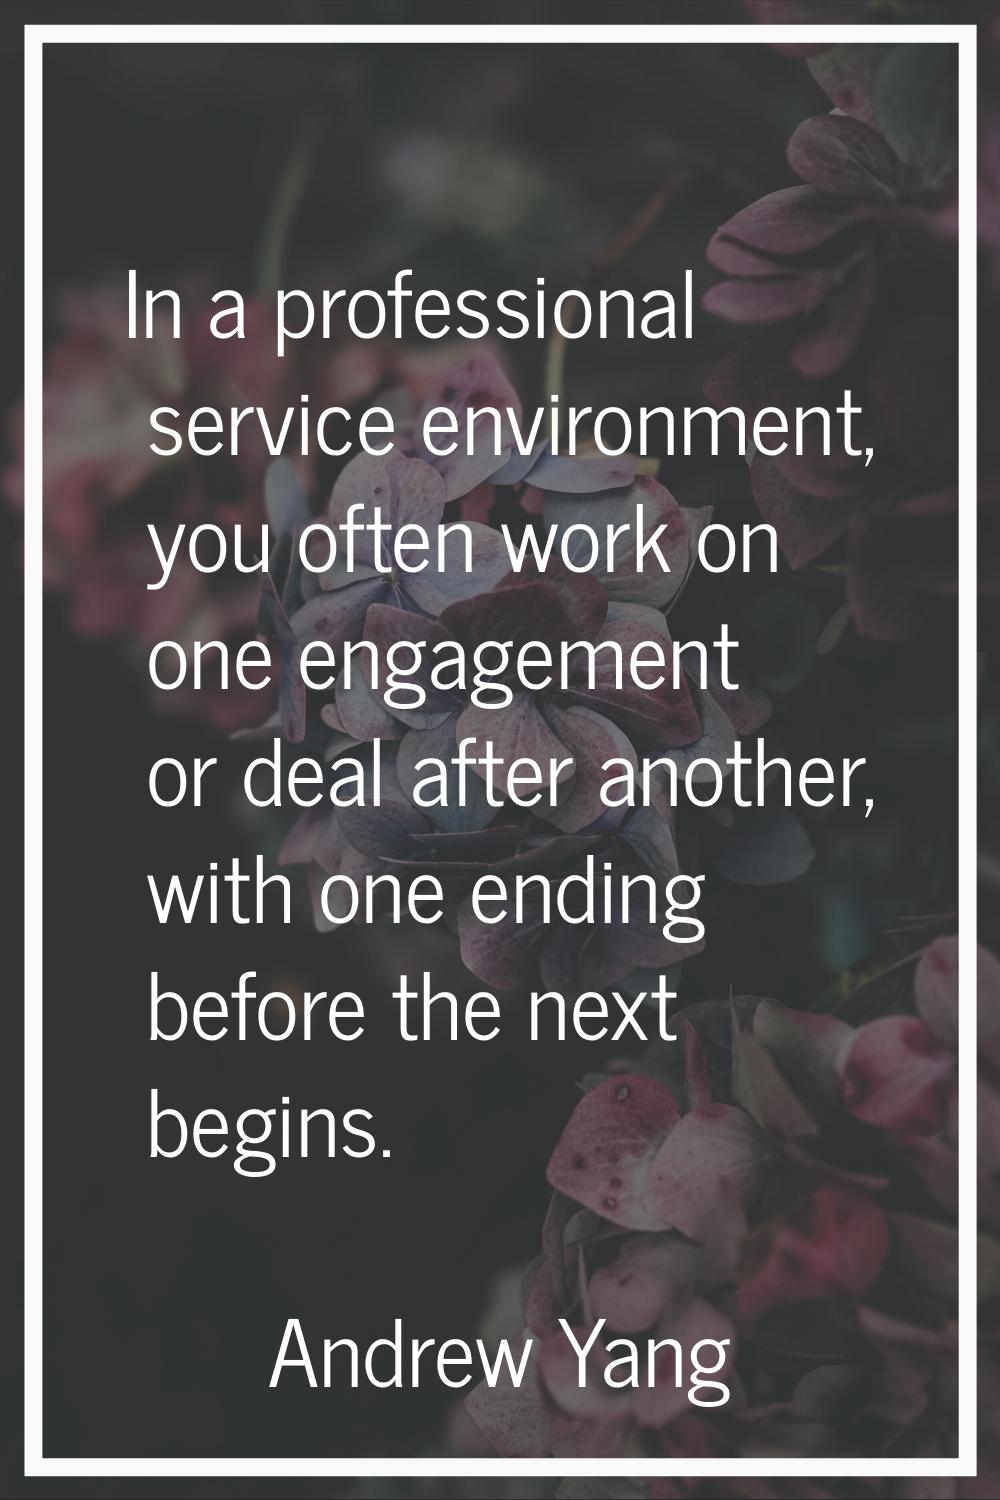 In a professional service environment, you often work on one engagement or deal after another, with